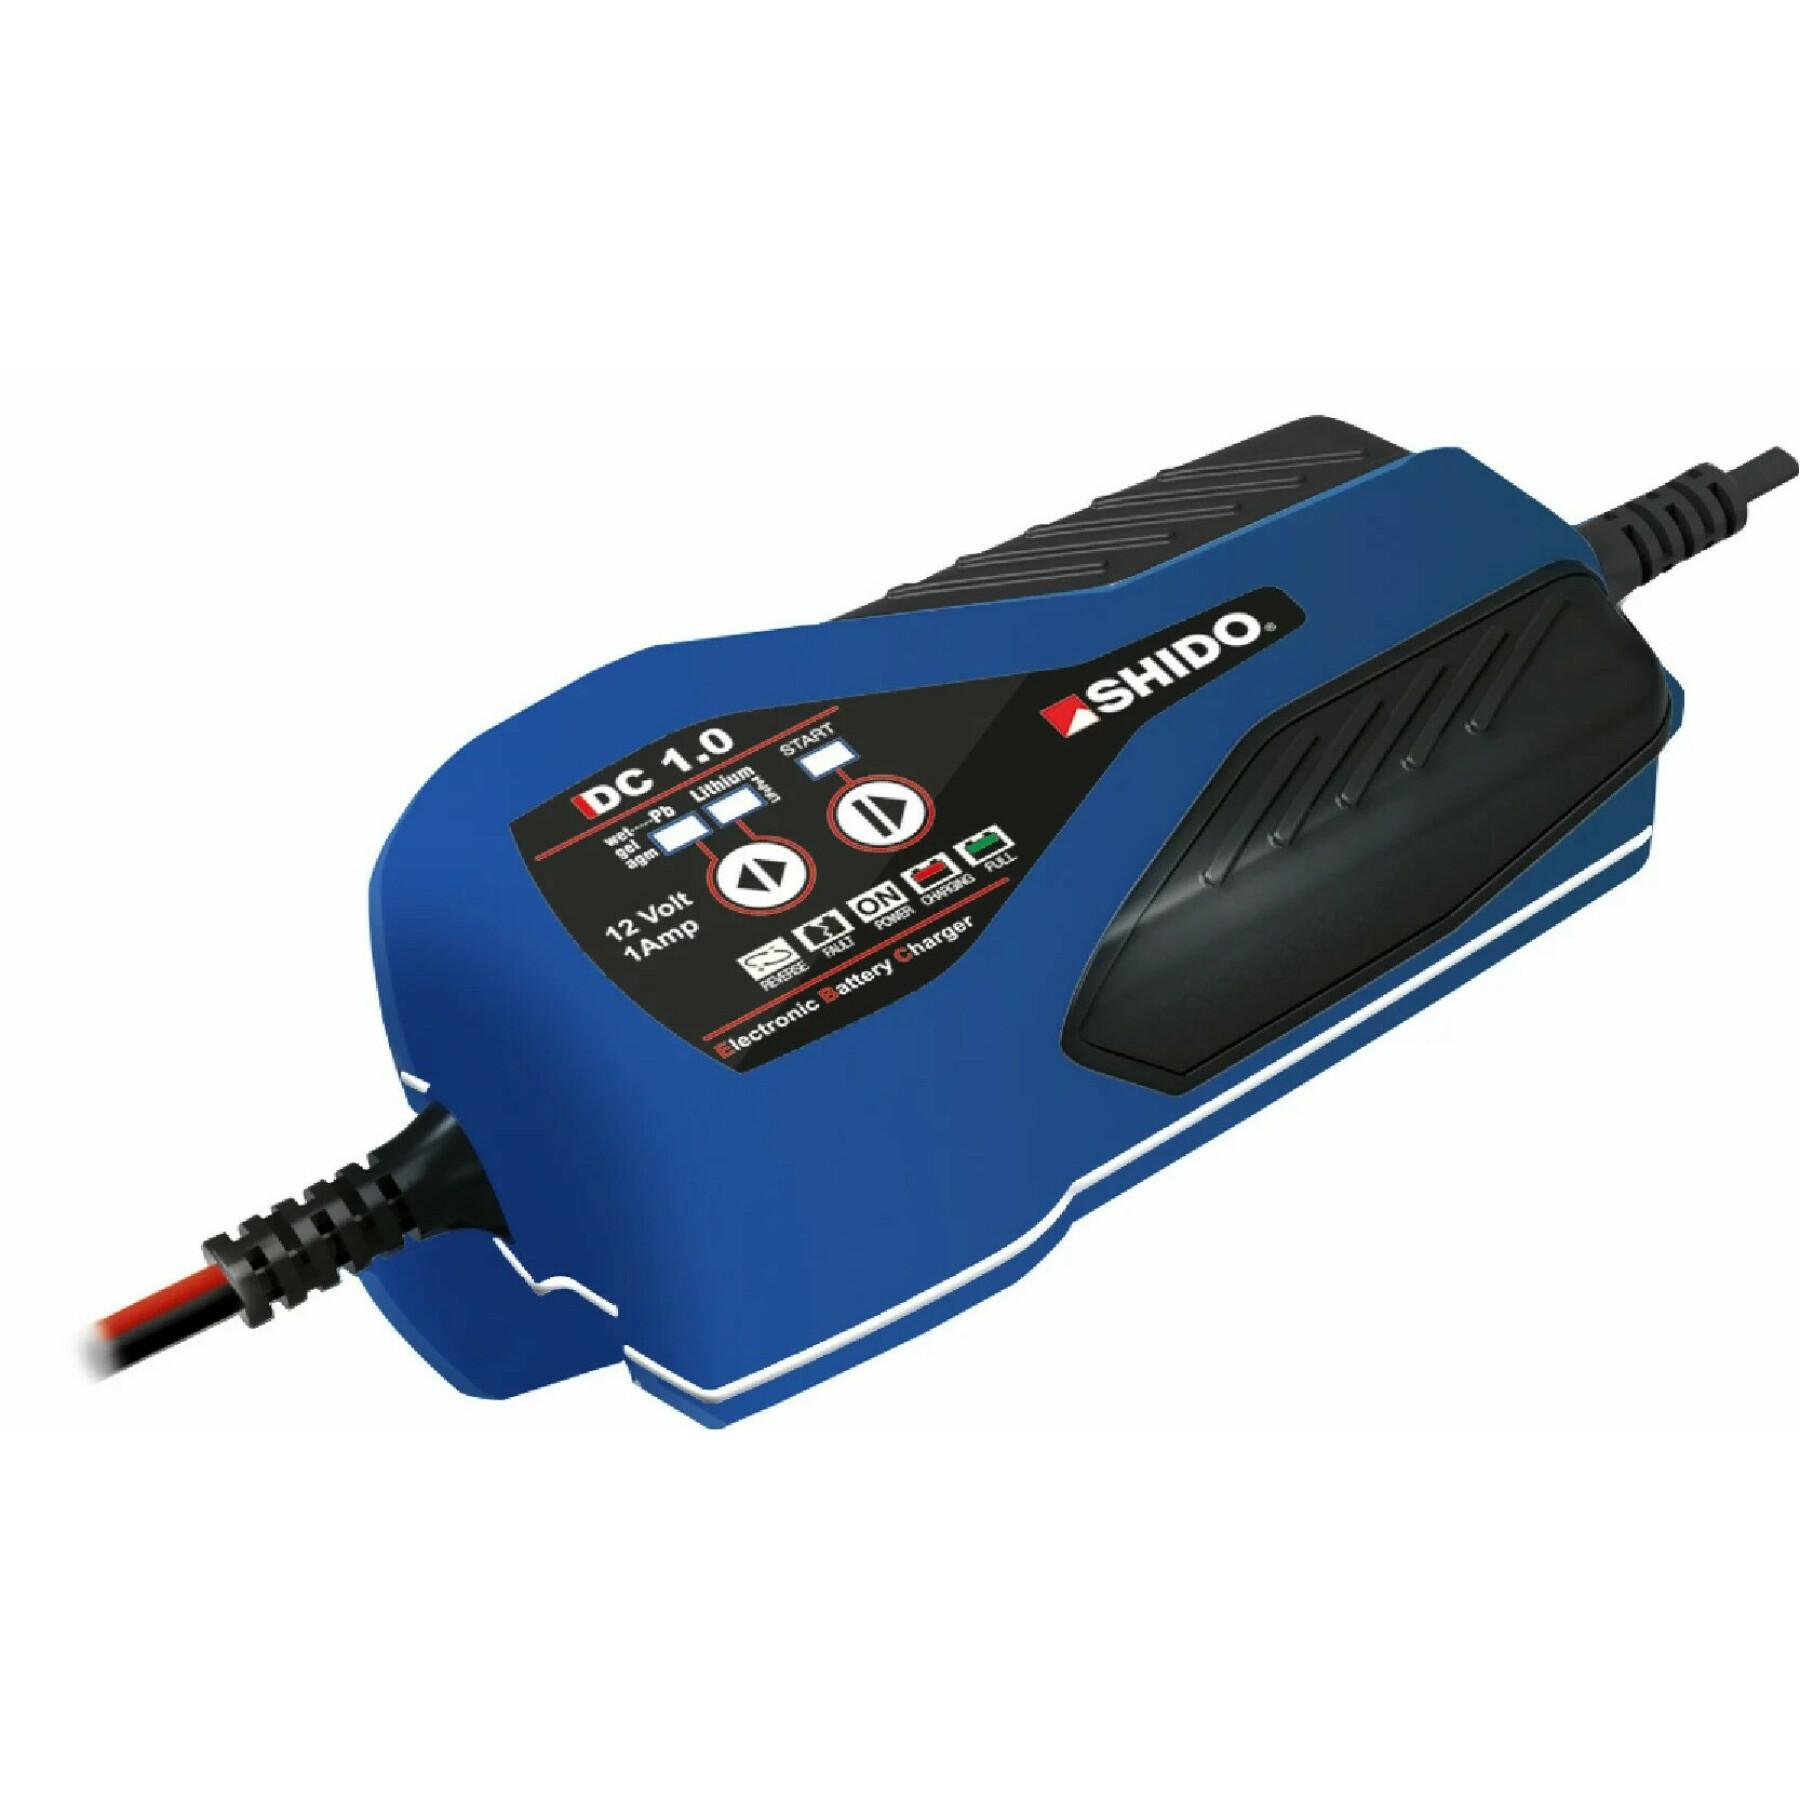 Motorcycle battery charger Shido DC 1.0